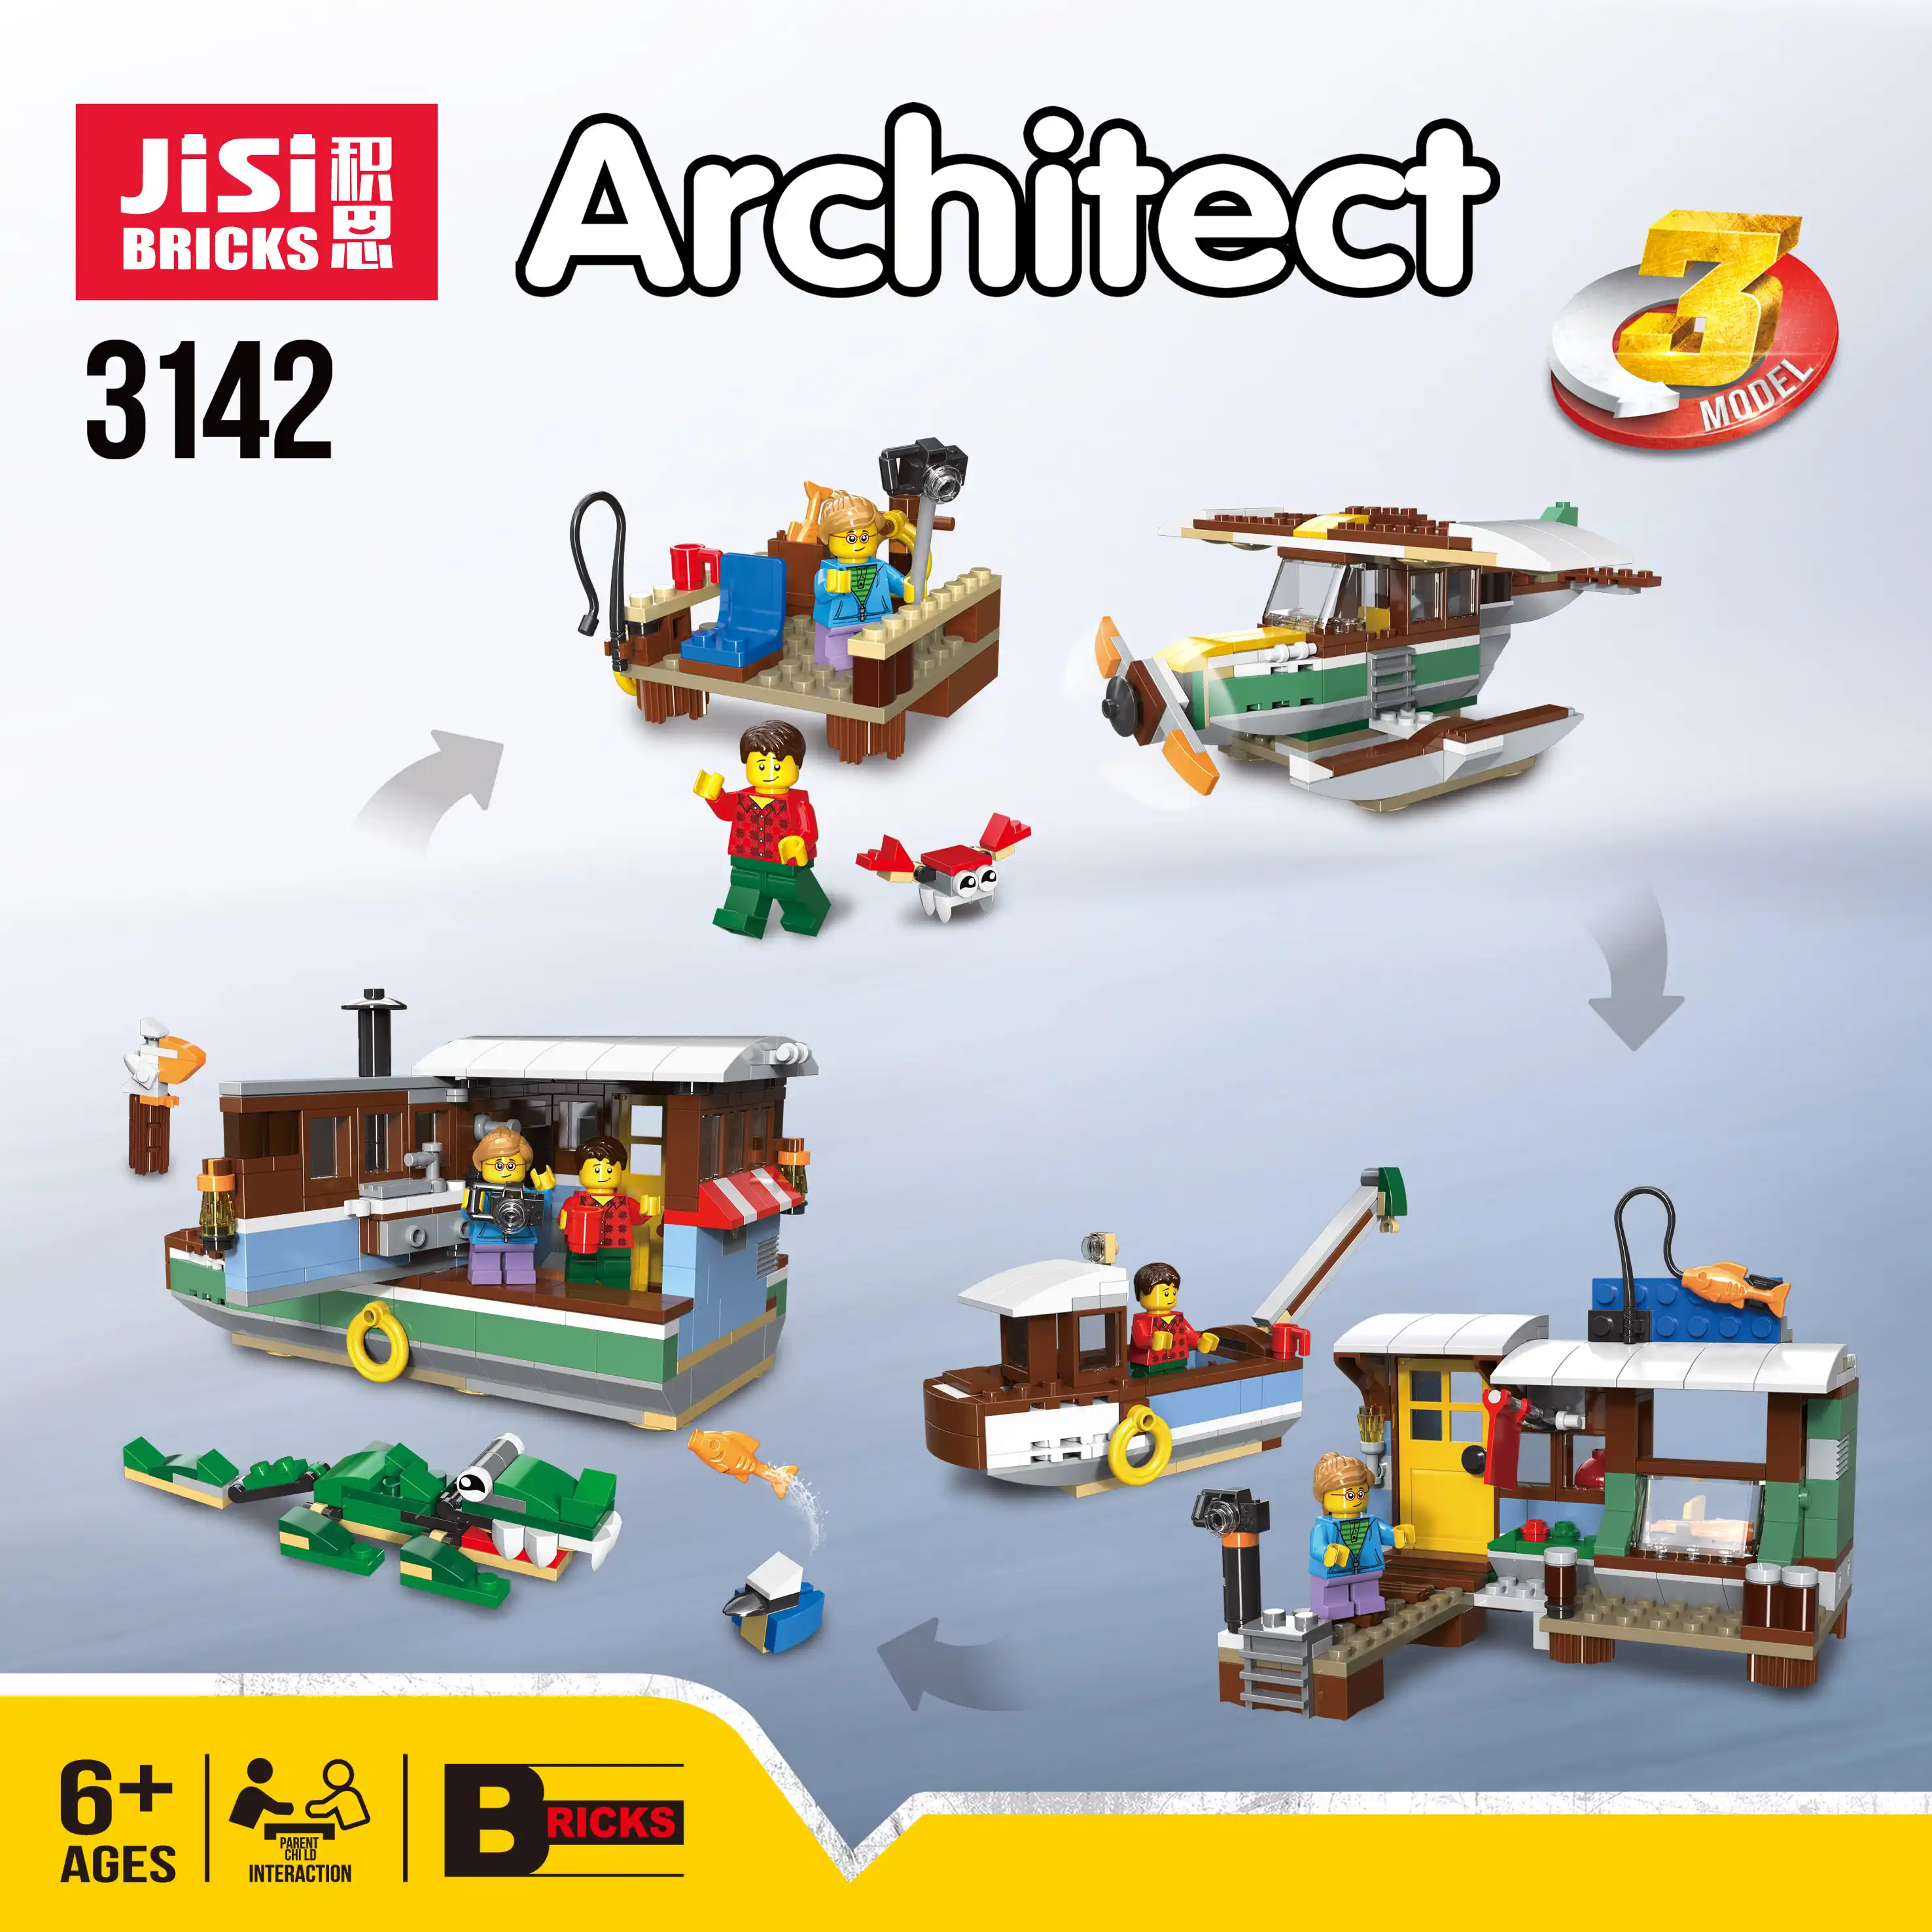 Easy Assembly - 25 Models in 1-390 Pieces Made in Japan Tublock Creative Building Brick Creator Set for Children SML 390